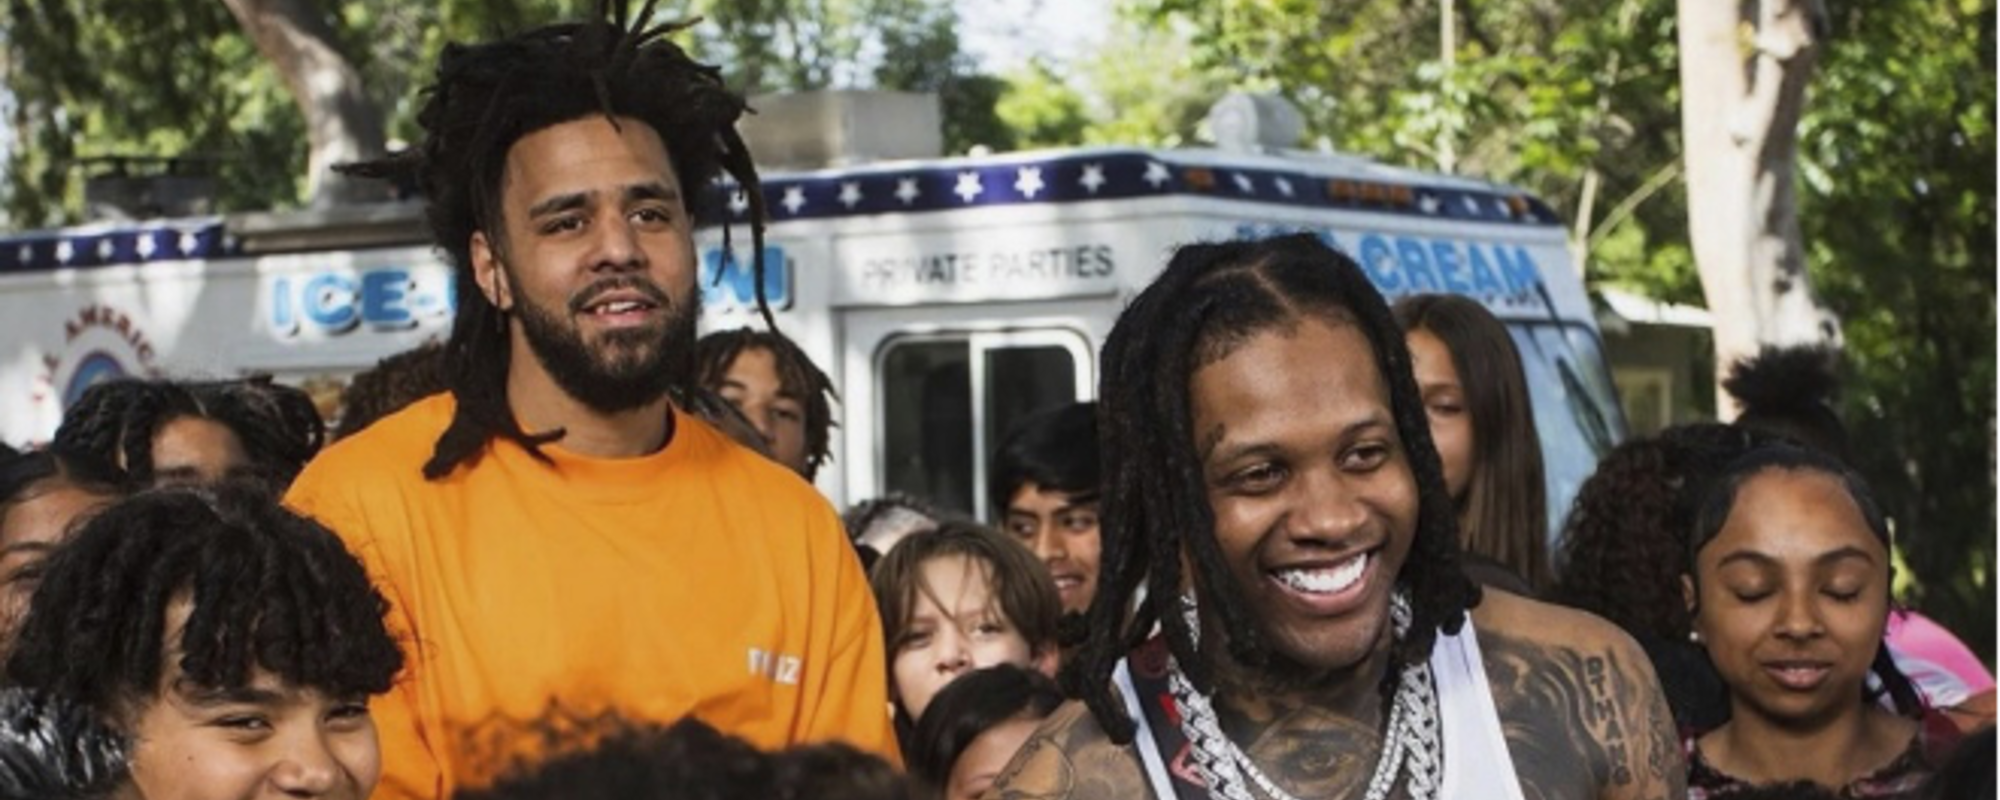 How Much Did Lil Durk Pay J. Cole for His Verse on “All My Life?”